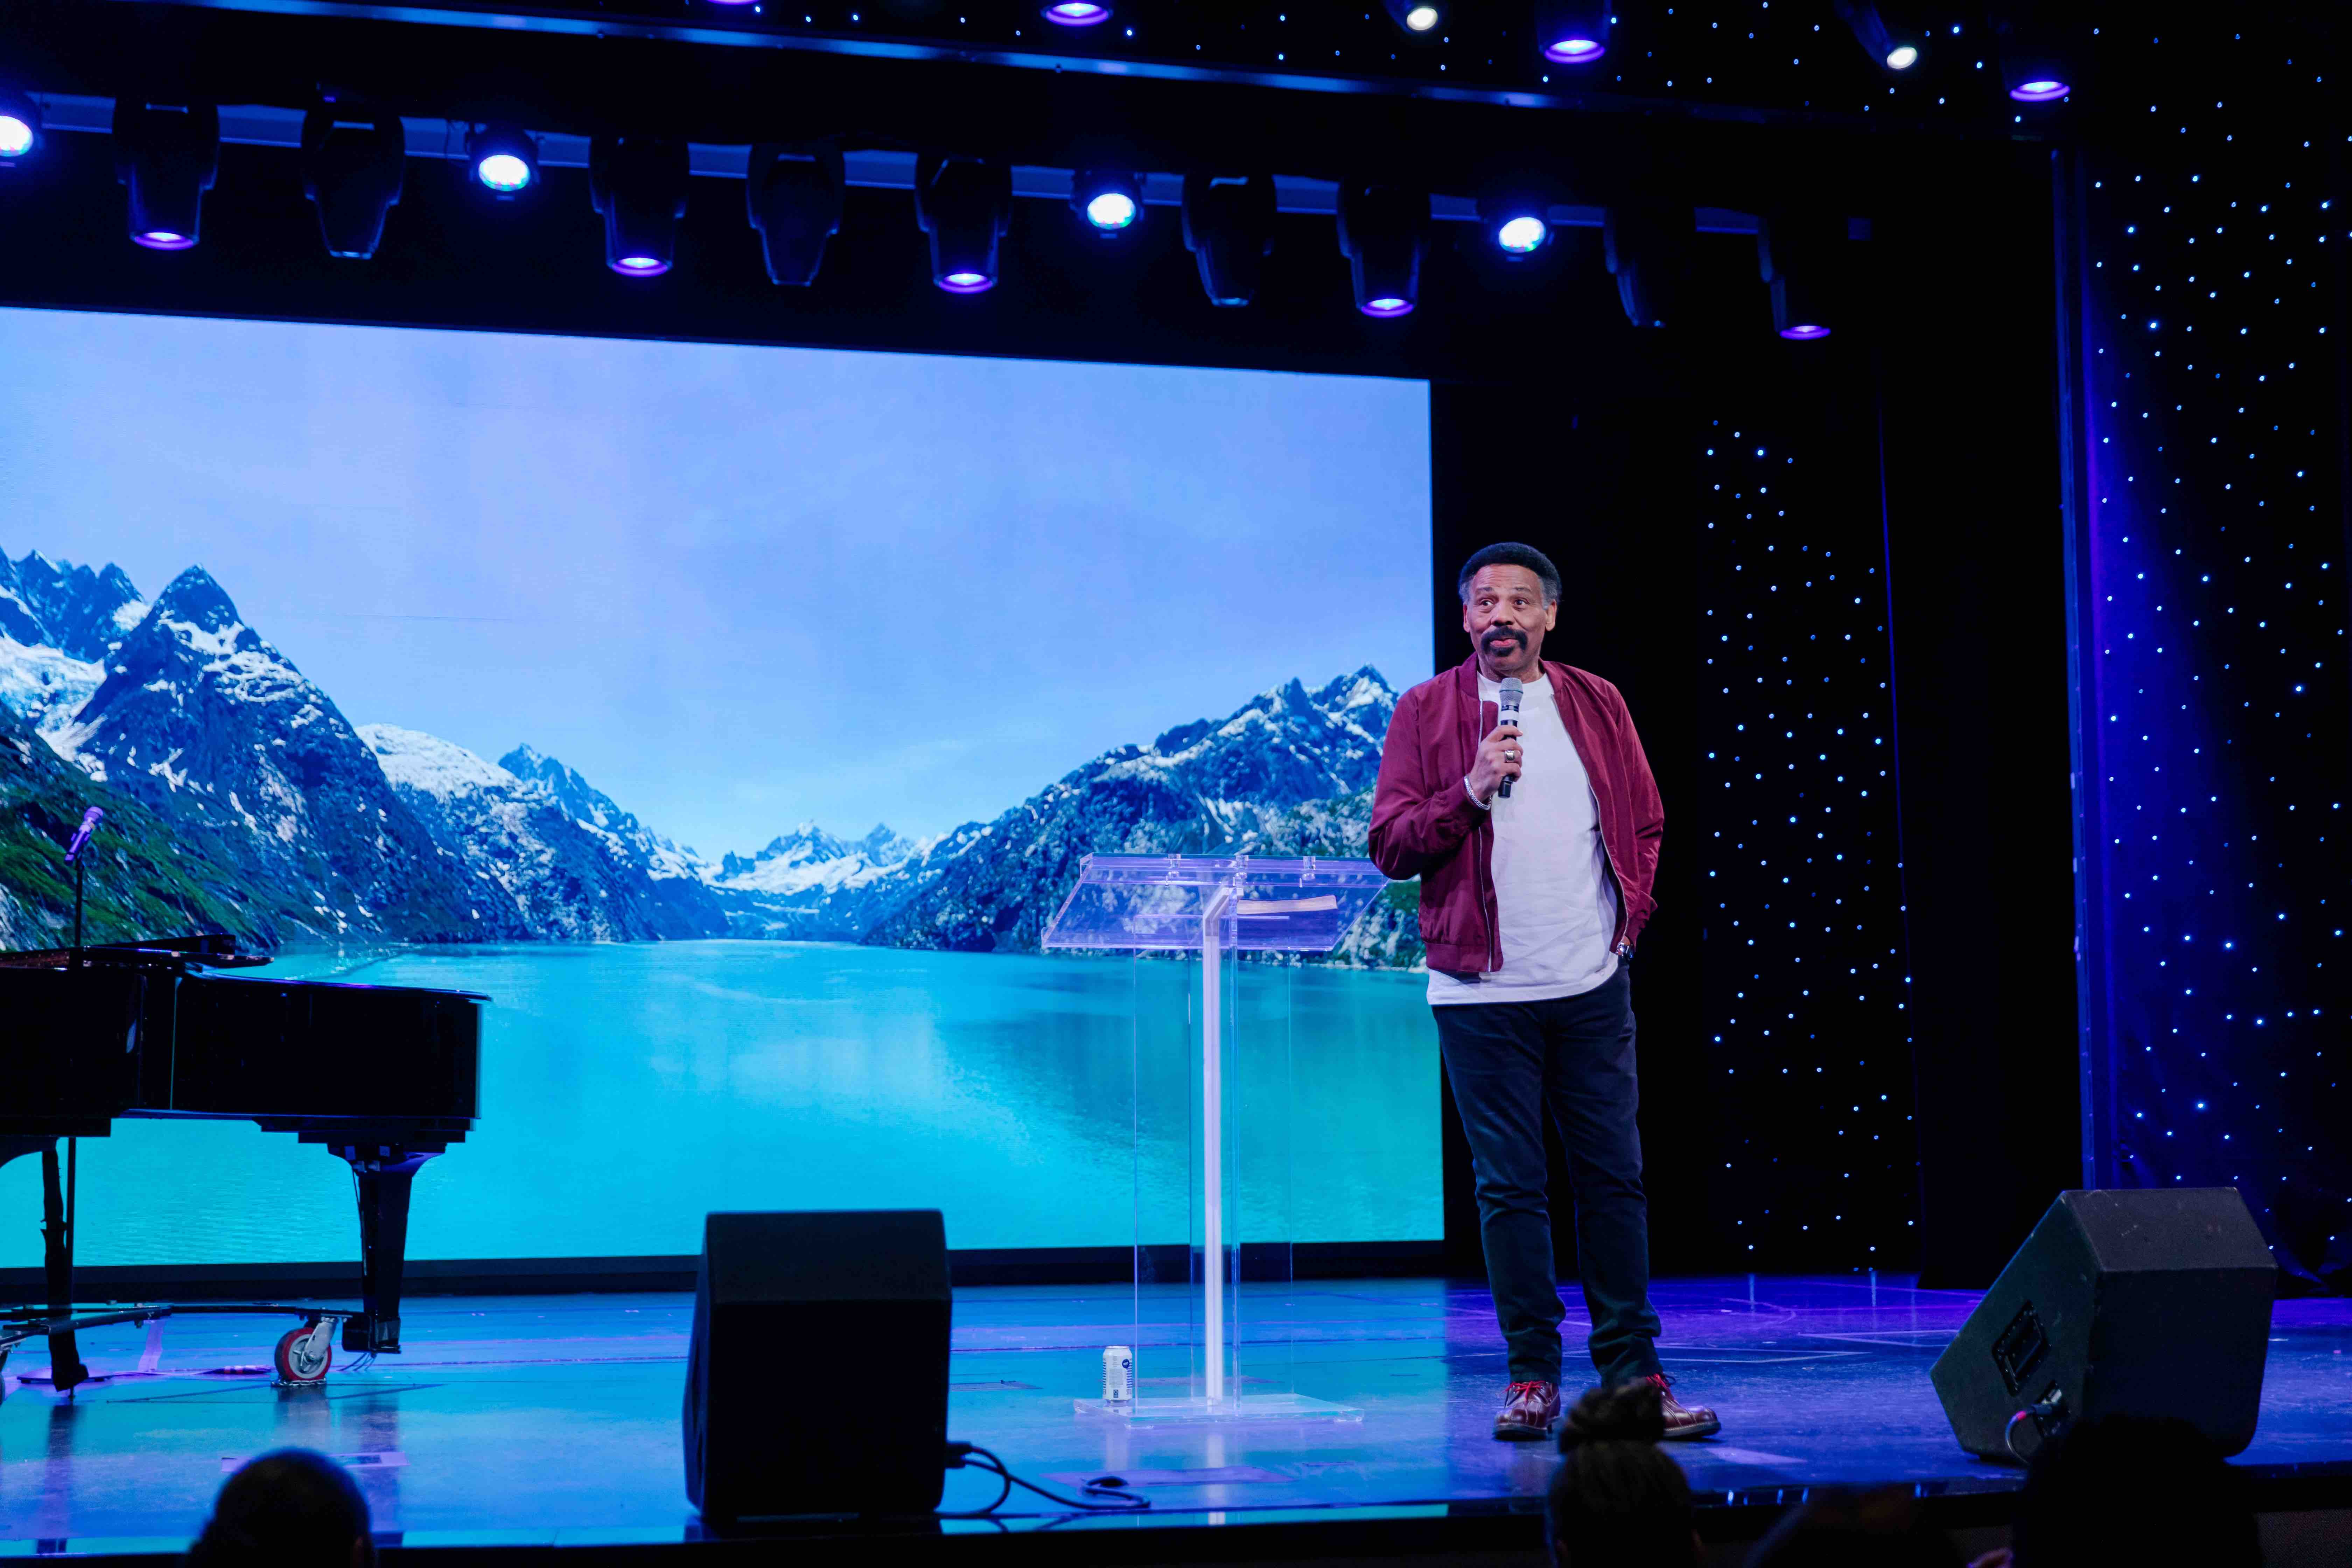 Tony Evans sharing a powerful message with a group of Christian travelers on Alaska cruise